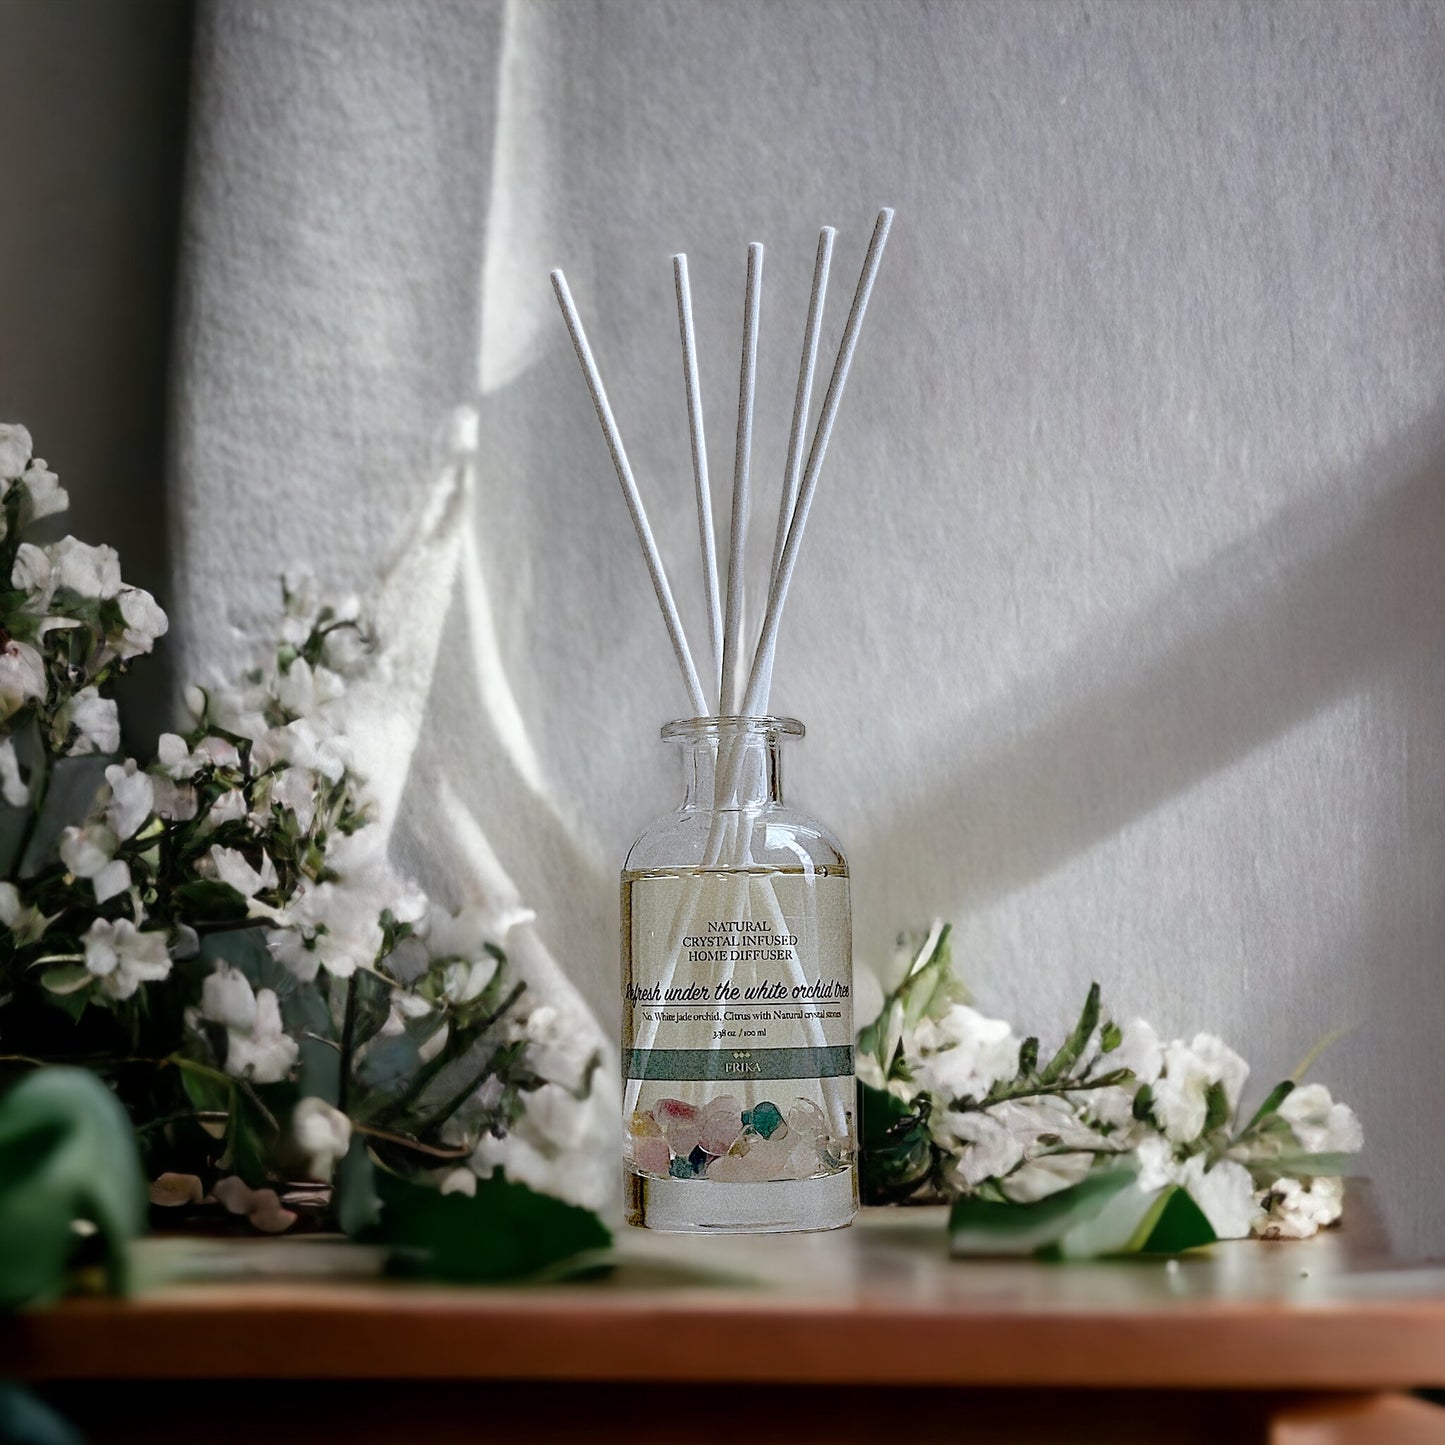 Refresh under the white orchid tree Natural crystal infused home diffuser